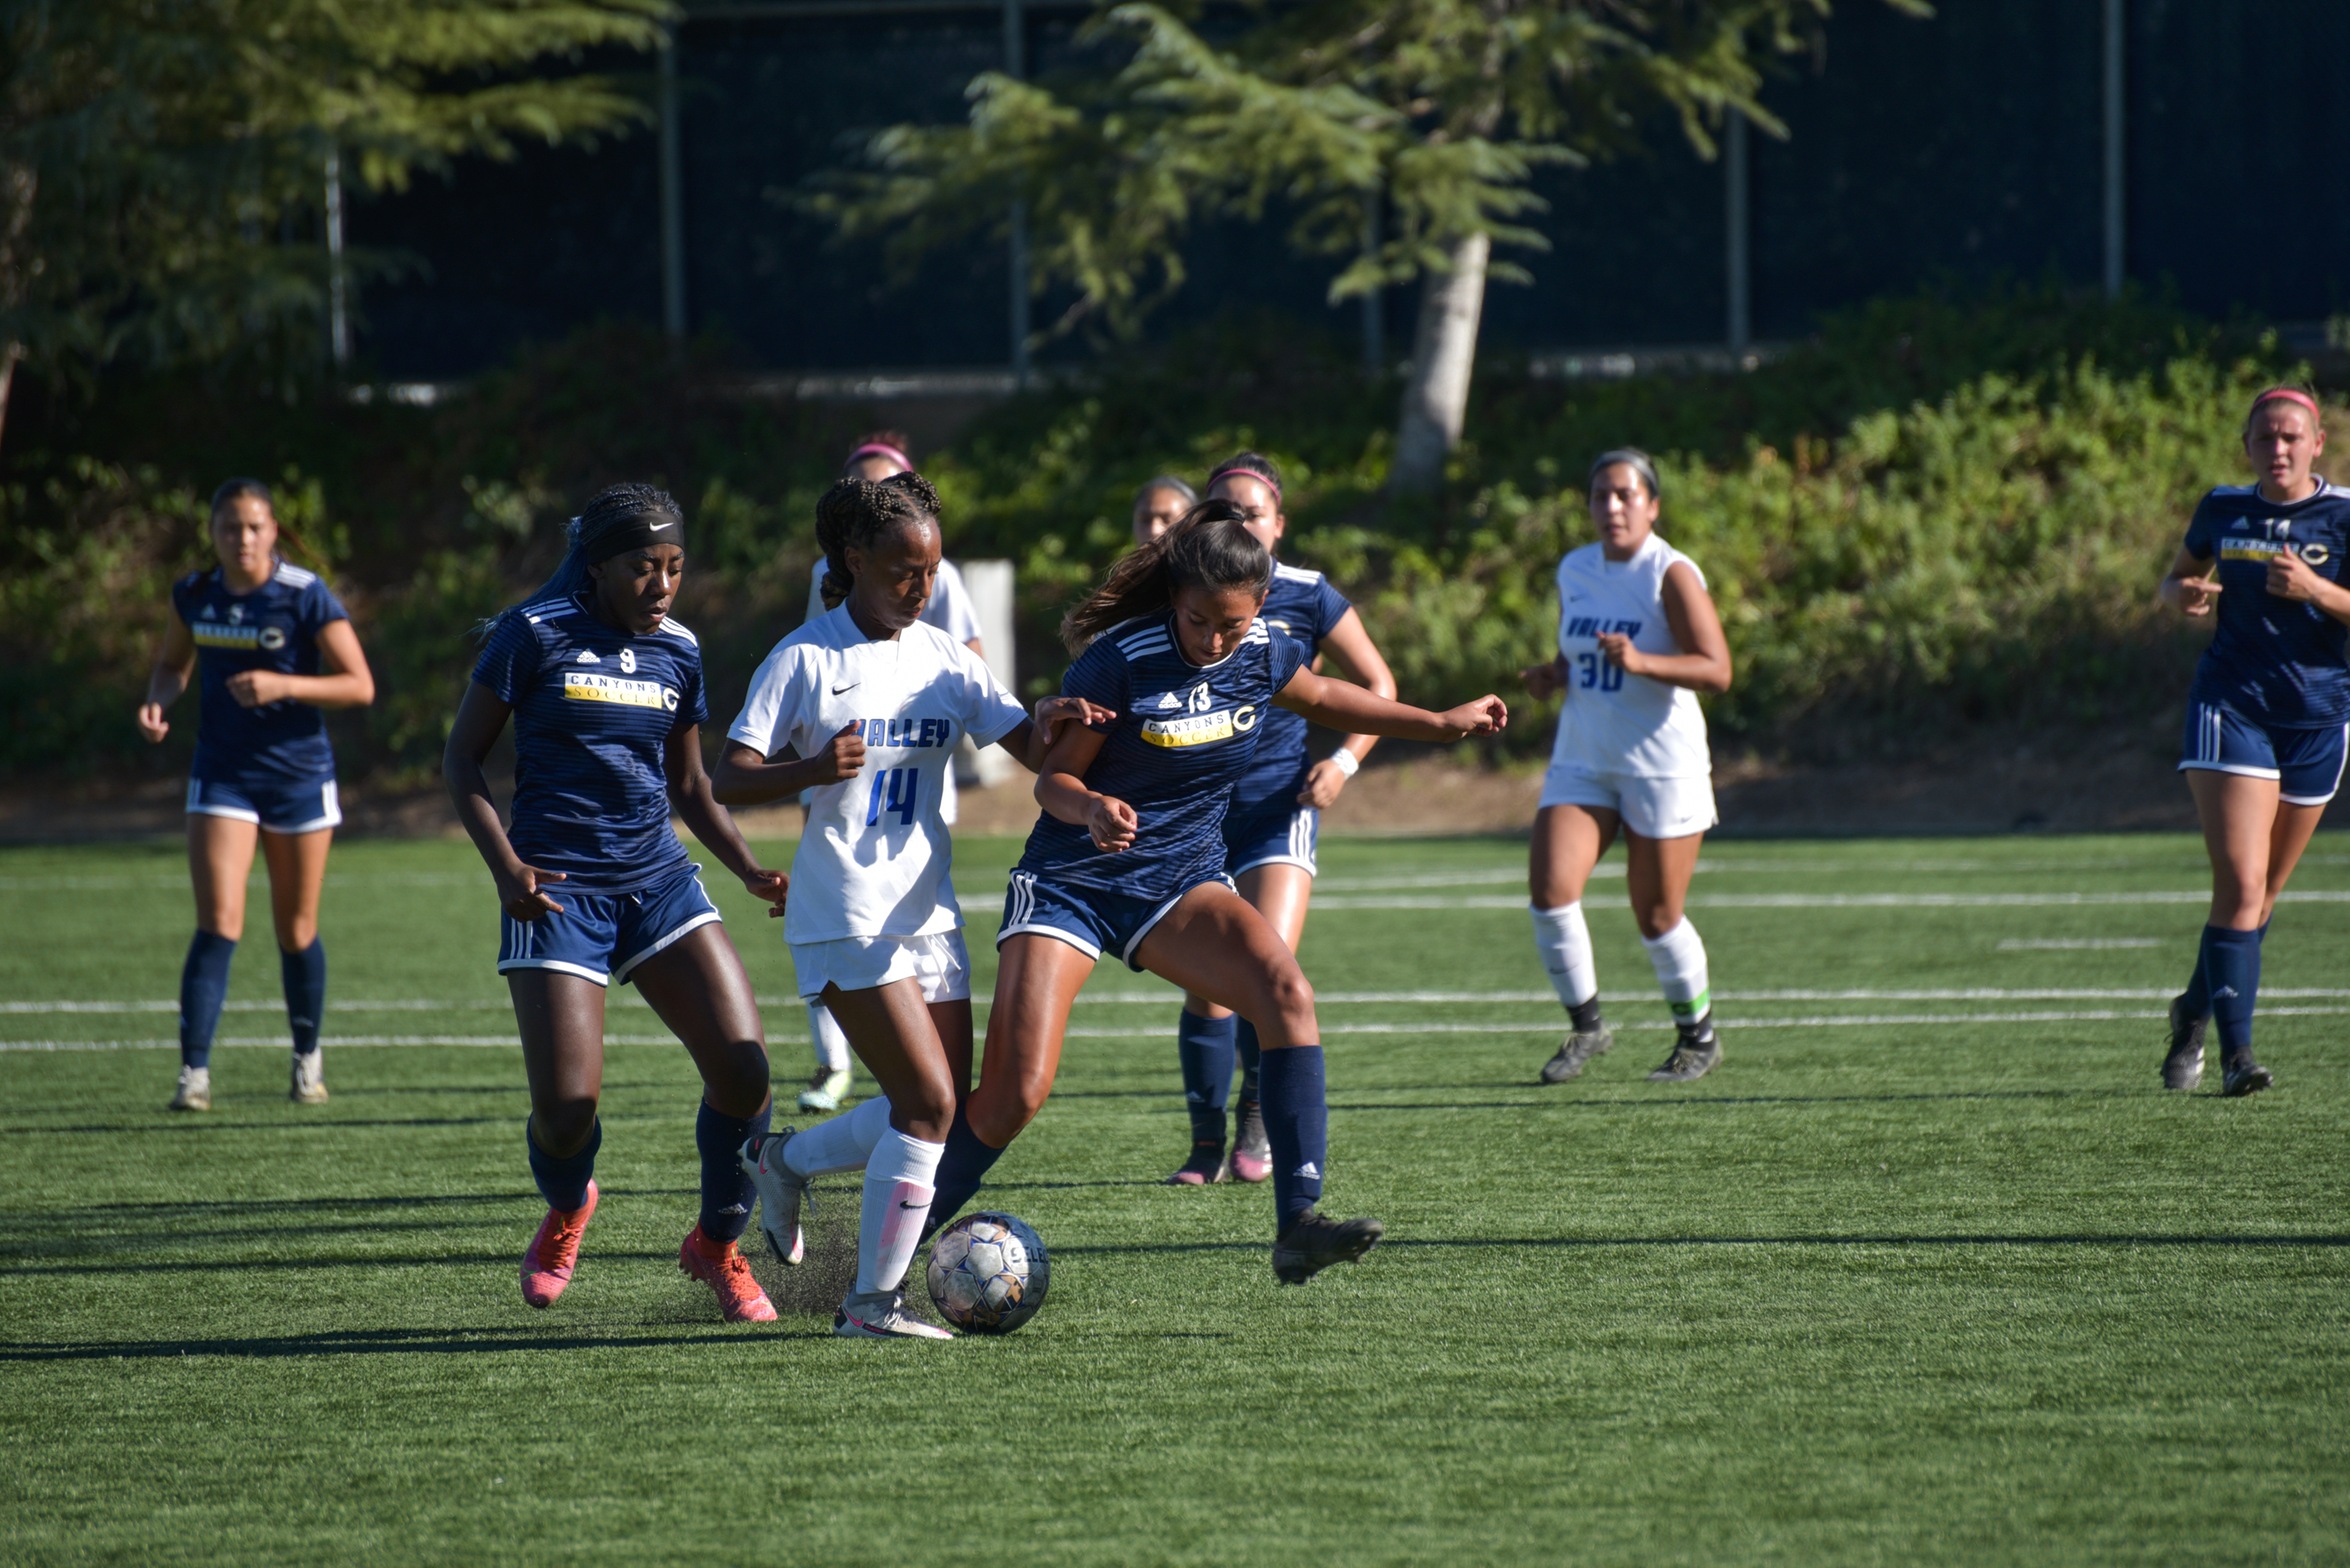 College of the Canyons fell to visiting San Bernardino Valley College by a 2-1 final score on Tuesday, with the lone goal coming off the foot of freshman Rebekah Brooks (9). —Mari Kneisel/COC Sports Information